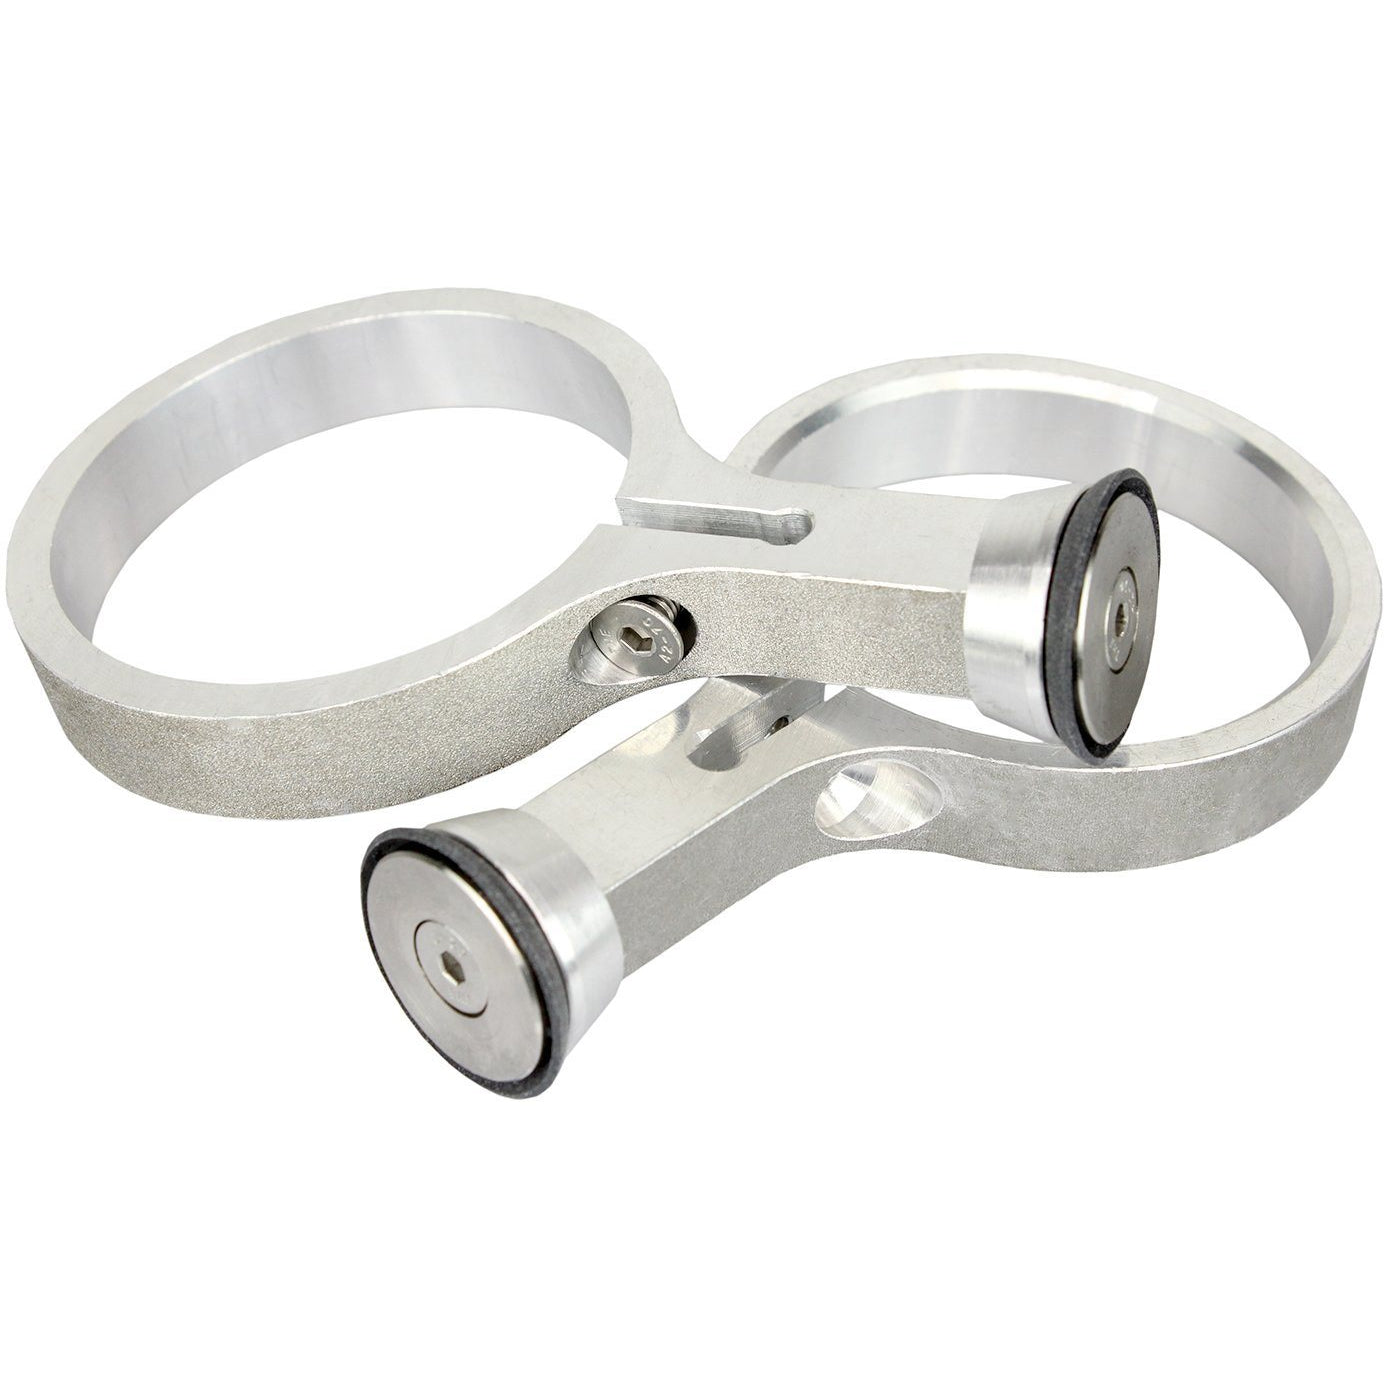 CMEP-OL Connecting Rods - 2 Pack